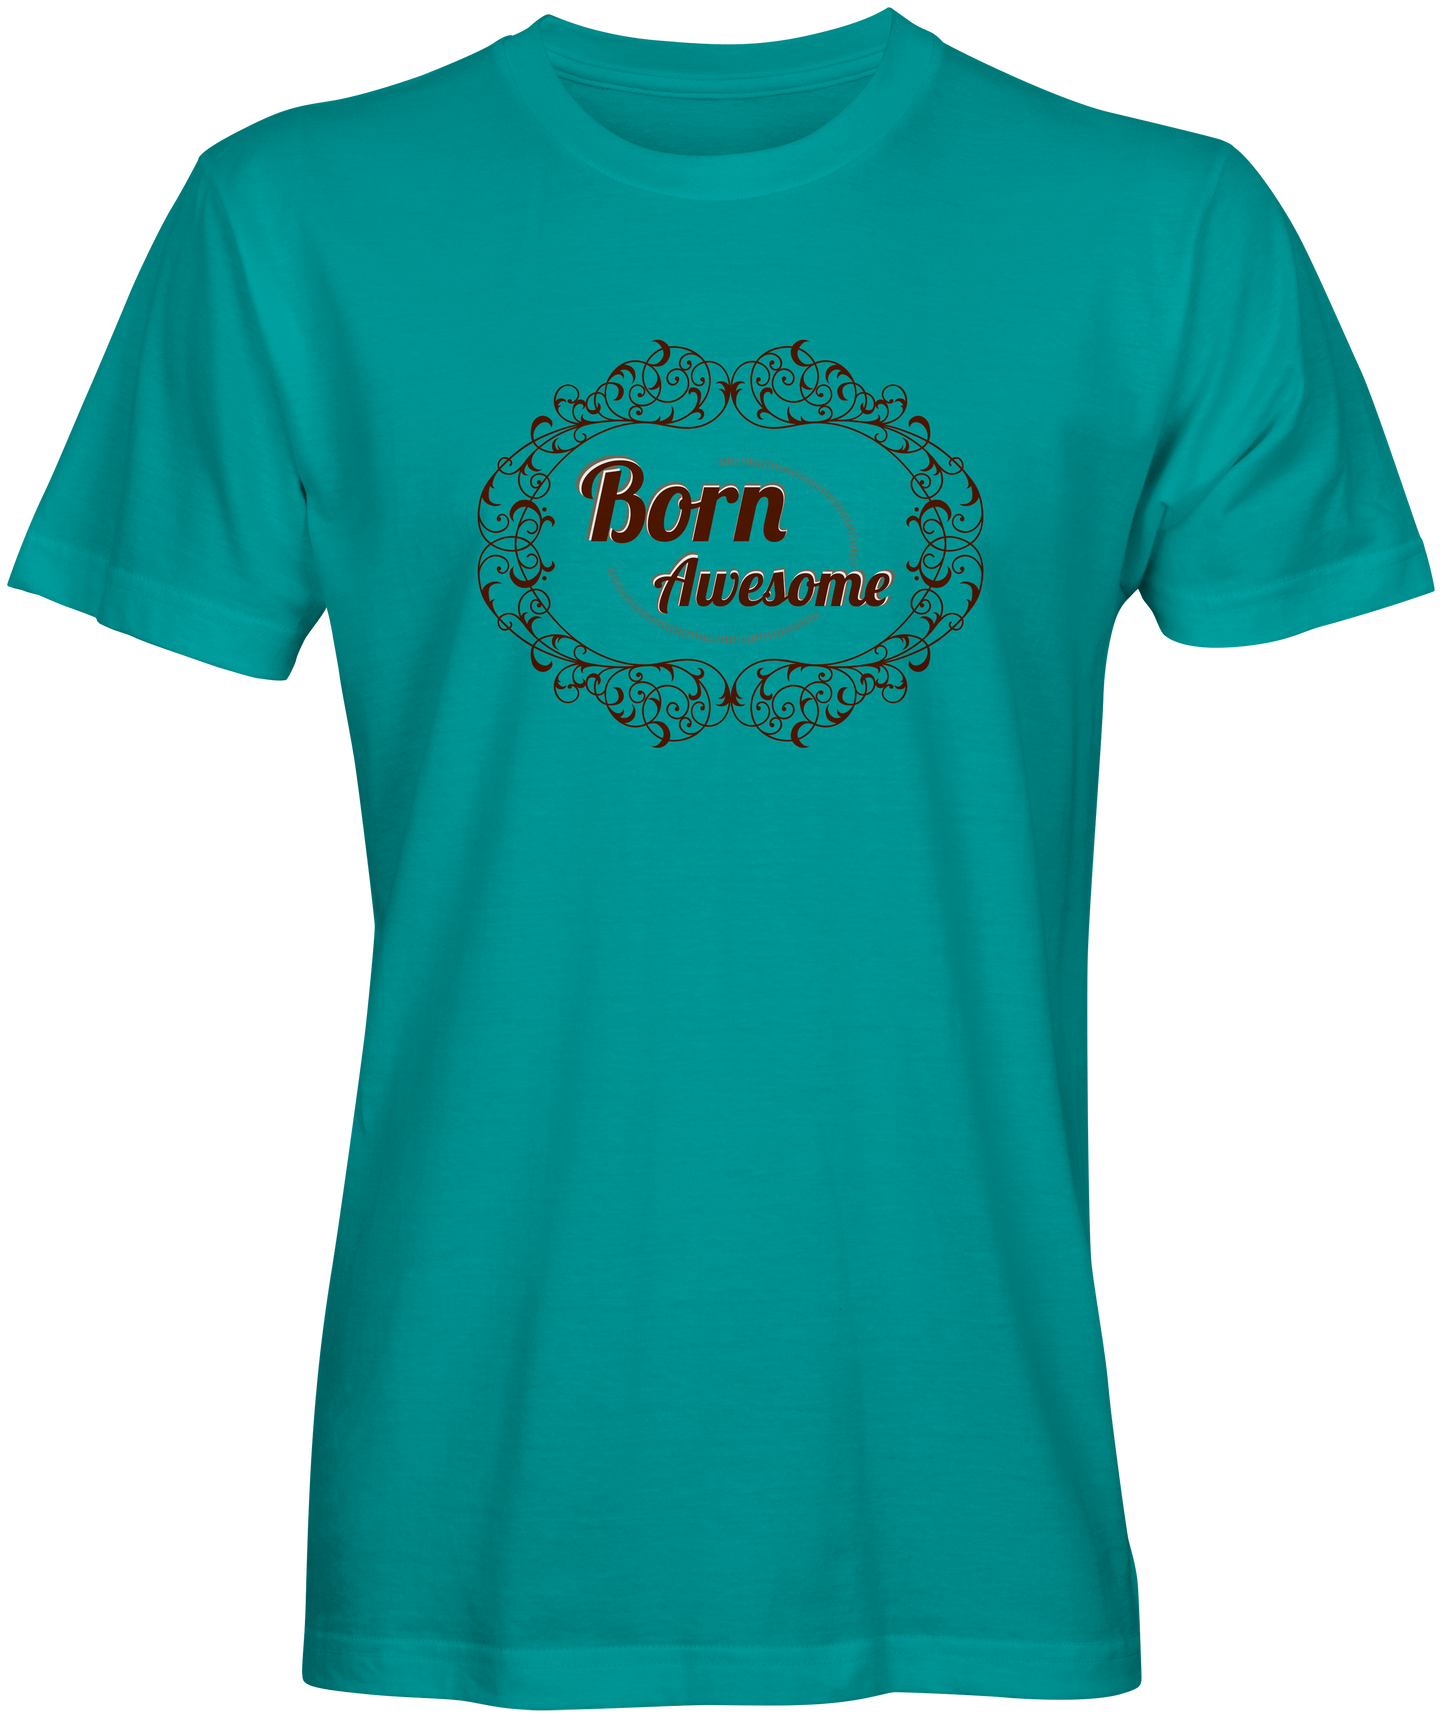 Born Awesome Slogan Tee for Sale